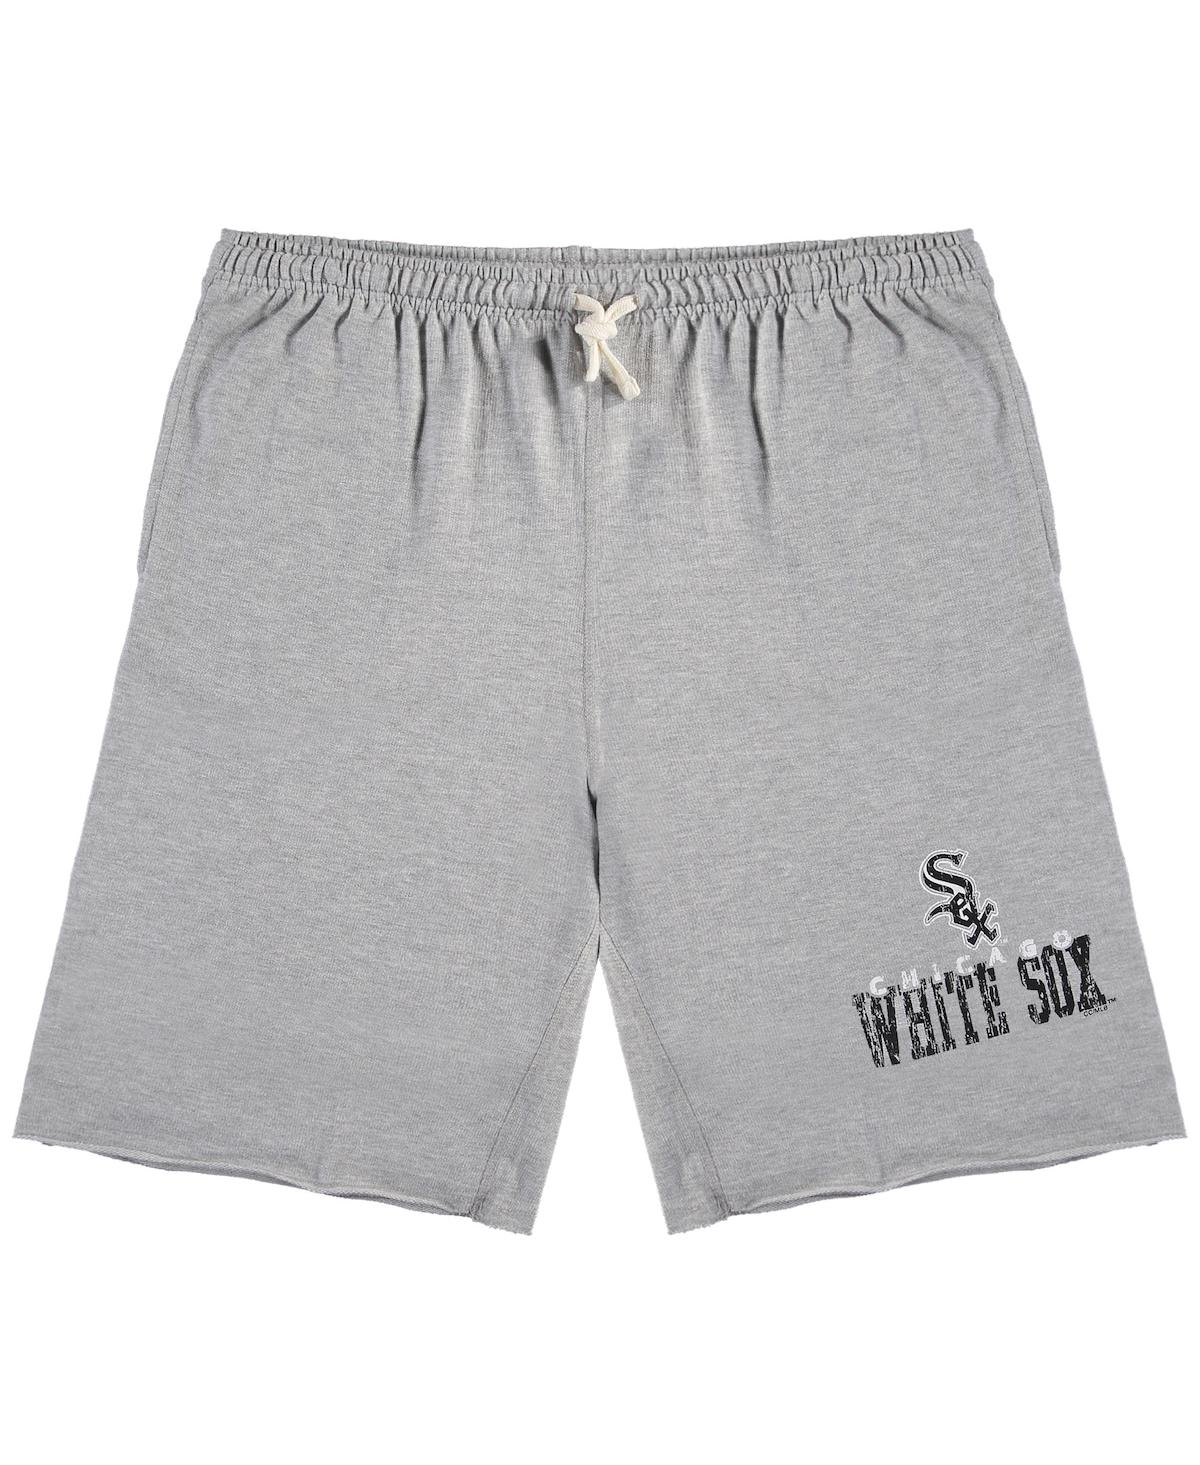 PROFILE MEN'S HEATHERED GRAY CHICAGO WHITE SOX BIG AND TALL FRENCH TERRY SHORTS